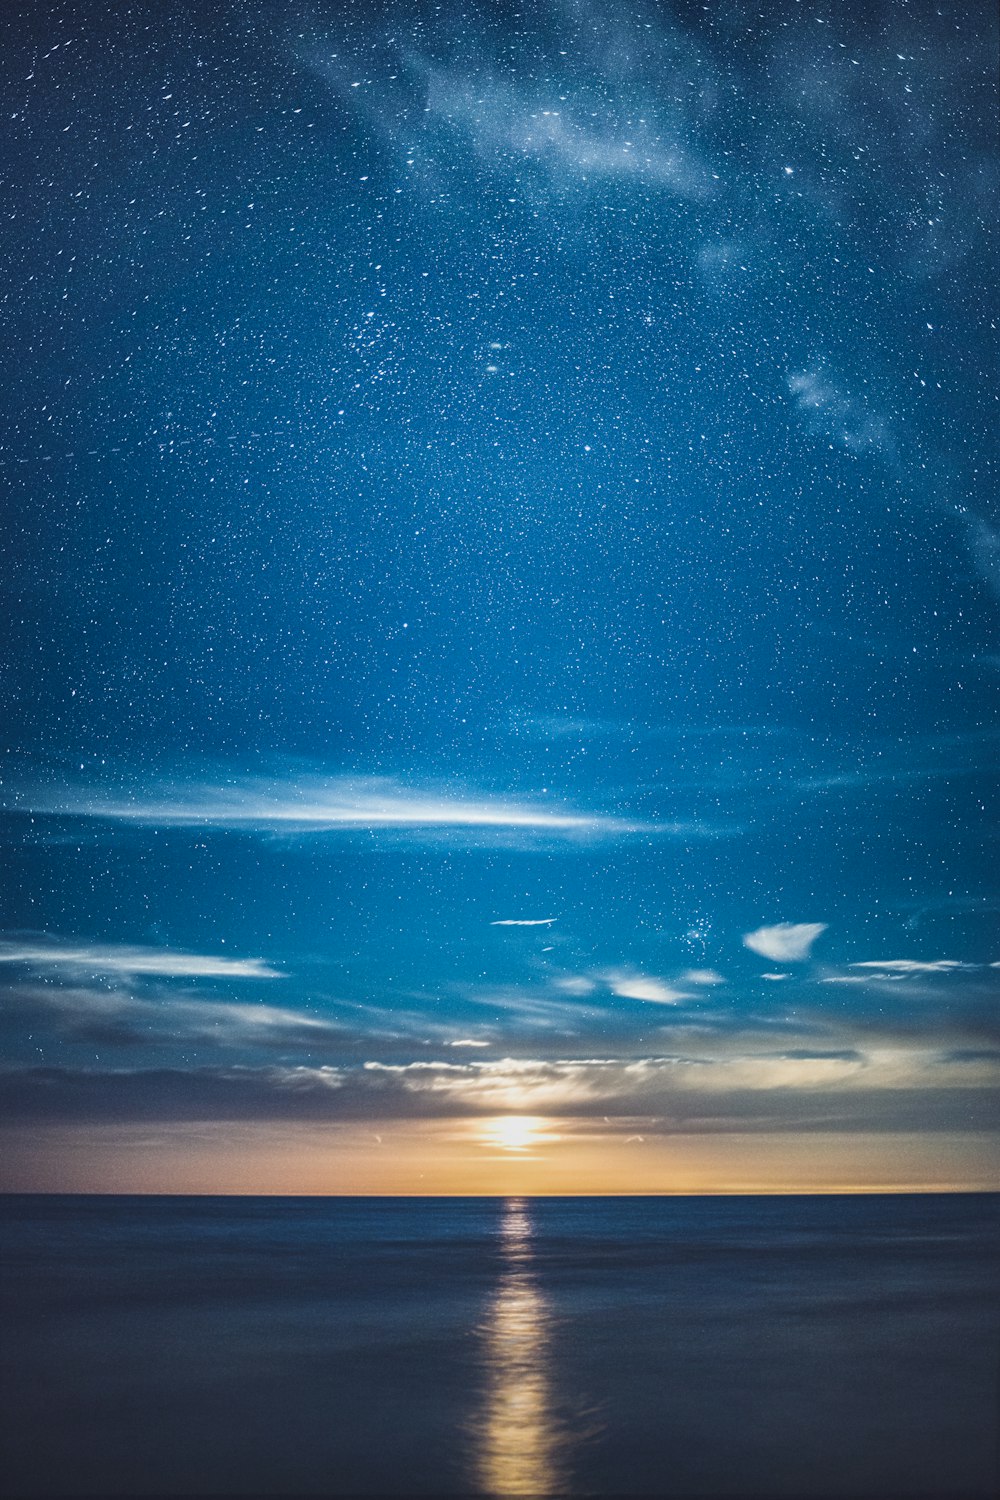 a view of the ocean at night with stars in the sky